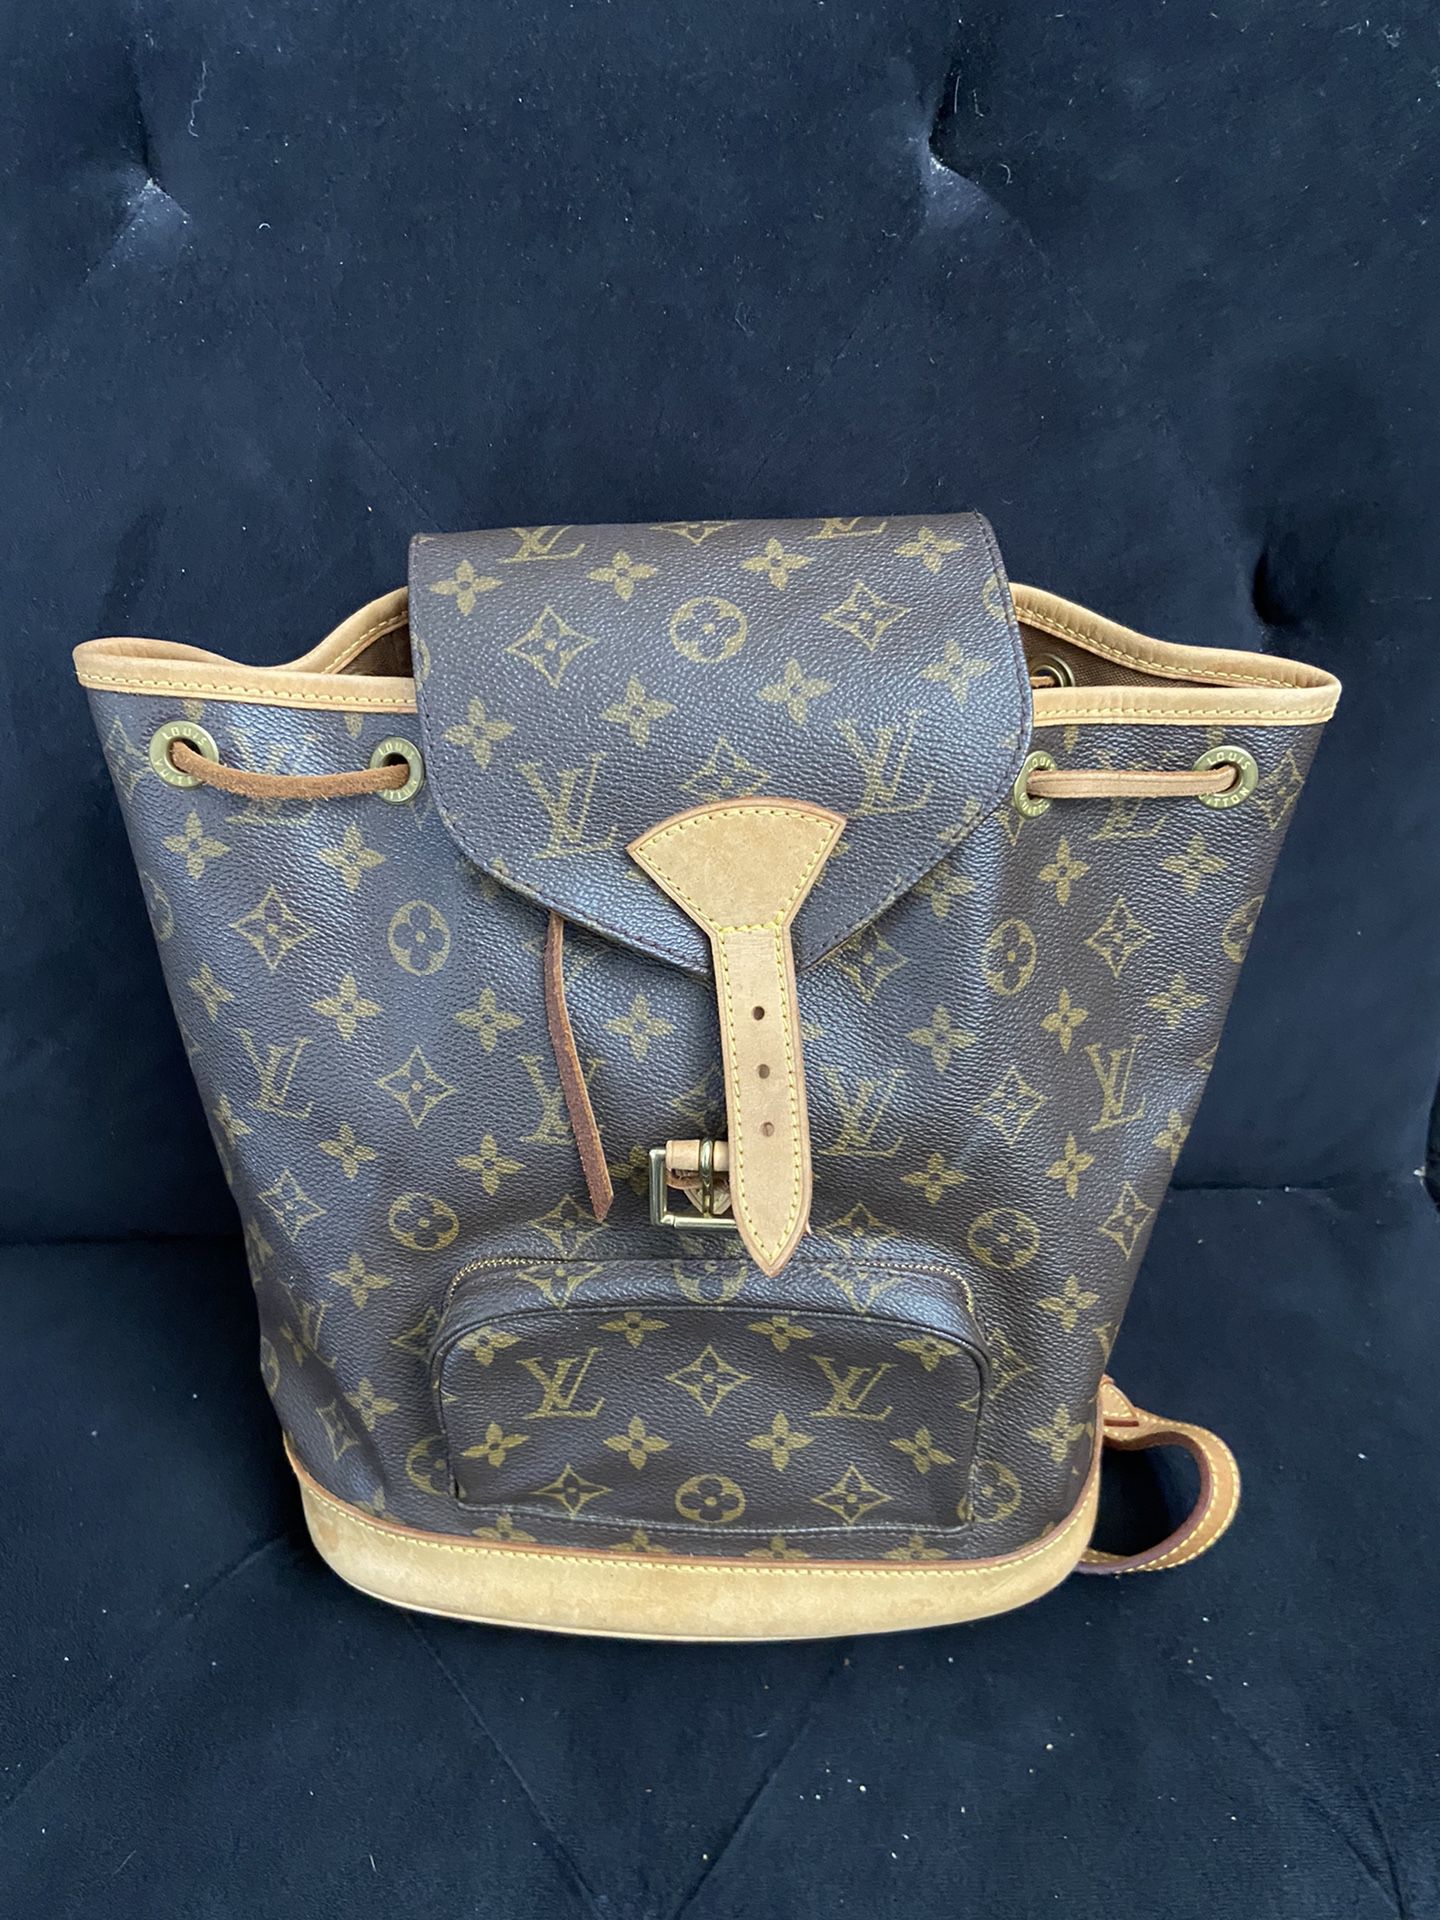 Lv Hand Bag Crossover Bag Purse Brown With Shoulder Strap for Sale in  Phoenix, AZ - OfferUp